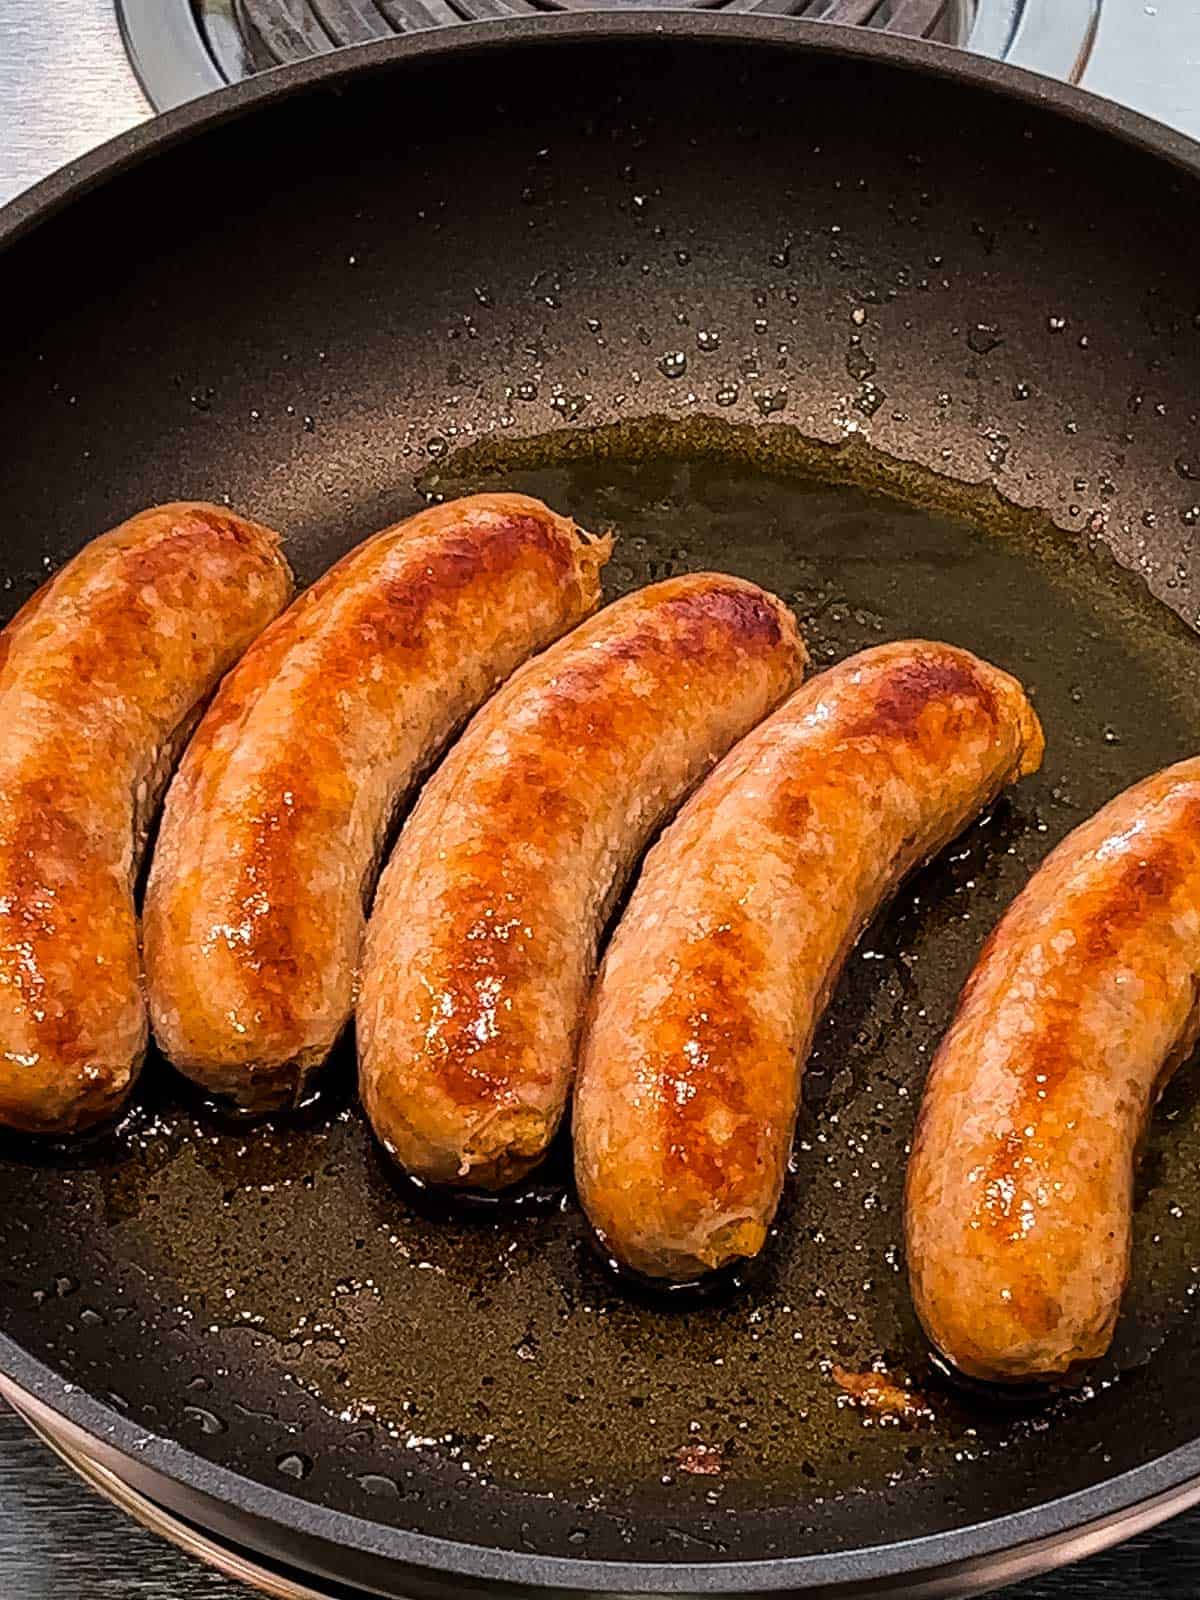 Browning the Italian sausage in a skillet.